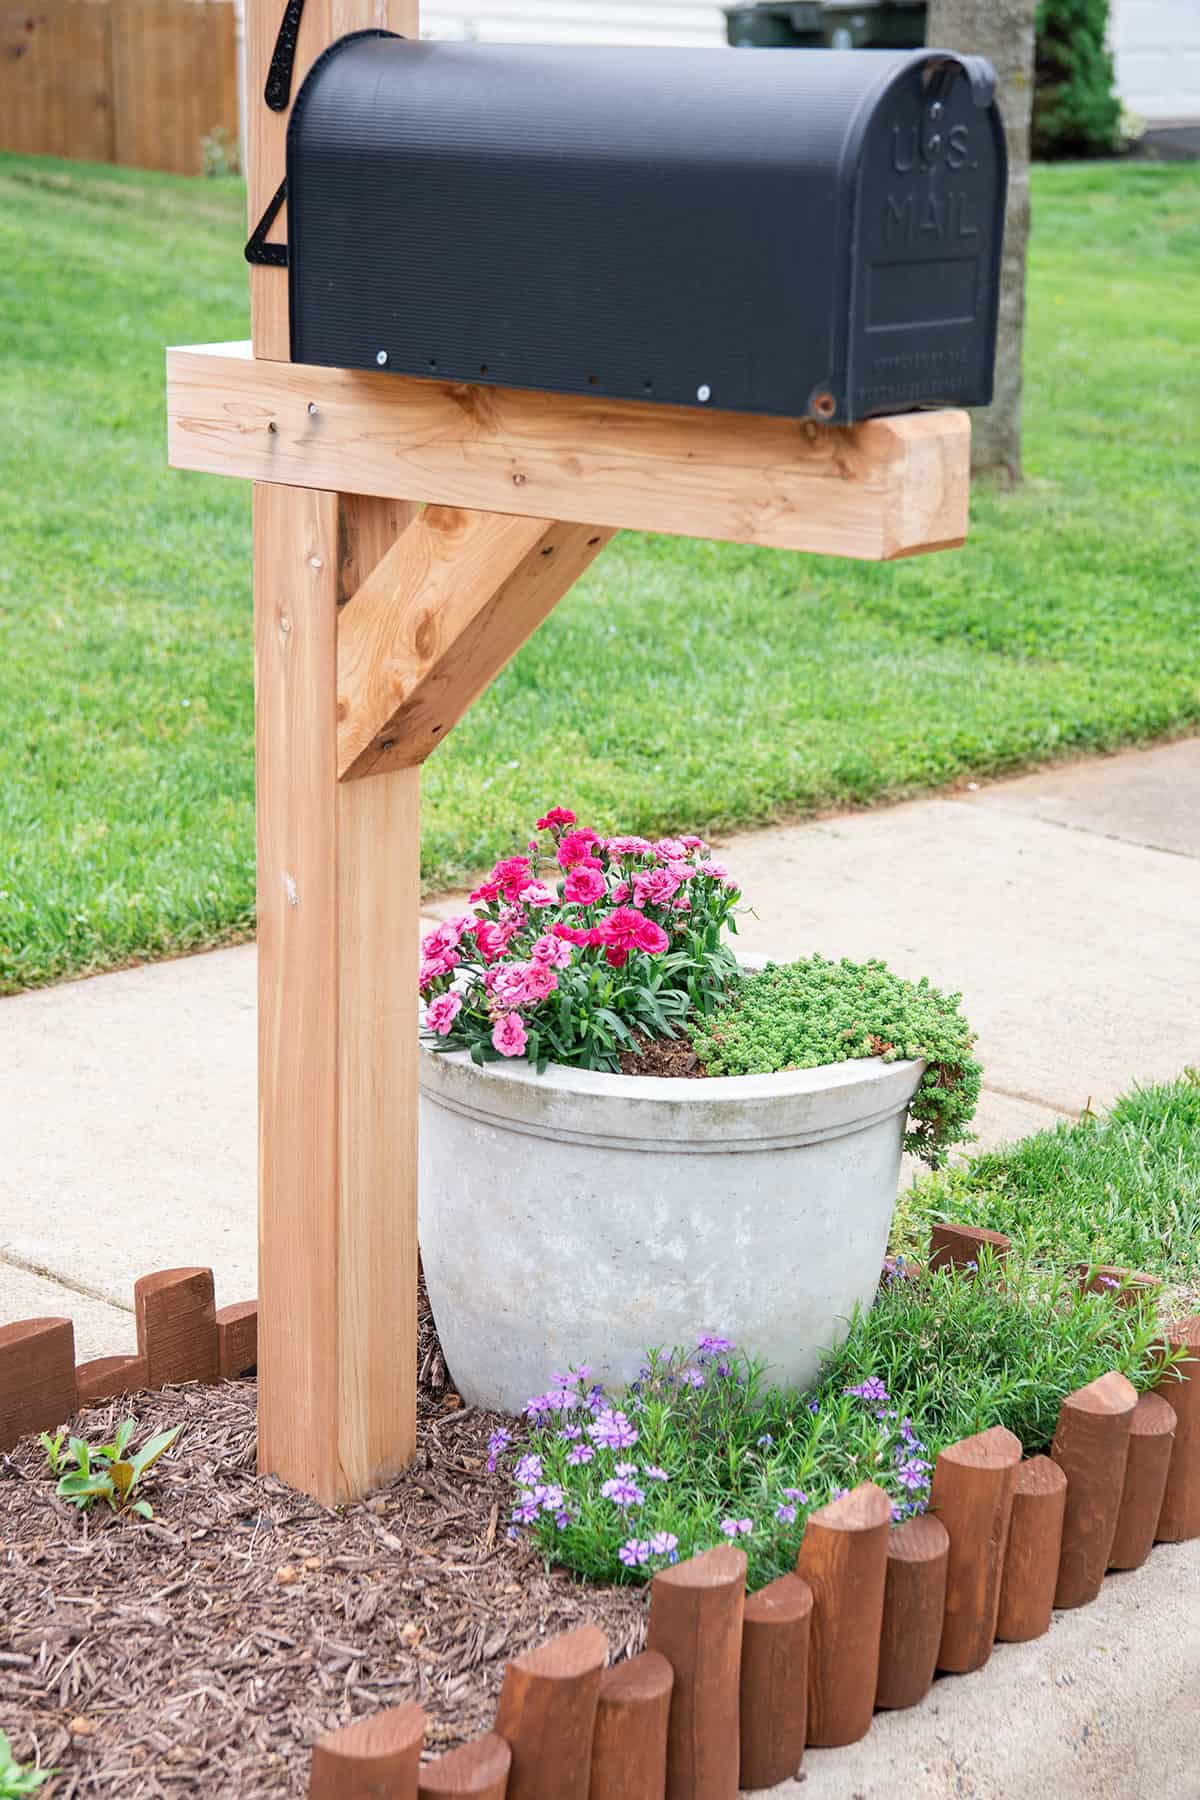 Self-watering planter in a mailbox garden idea for decoration.